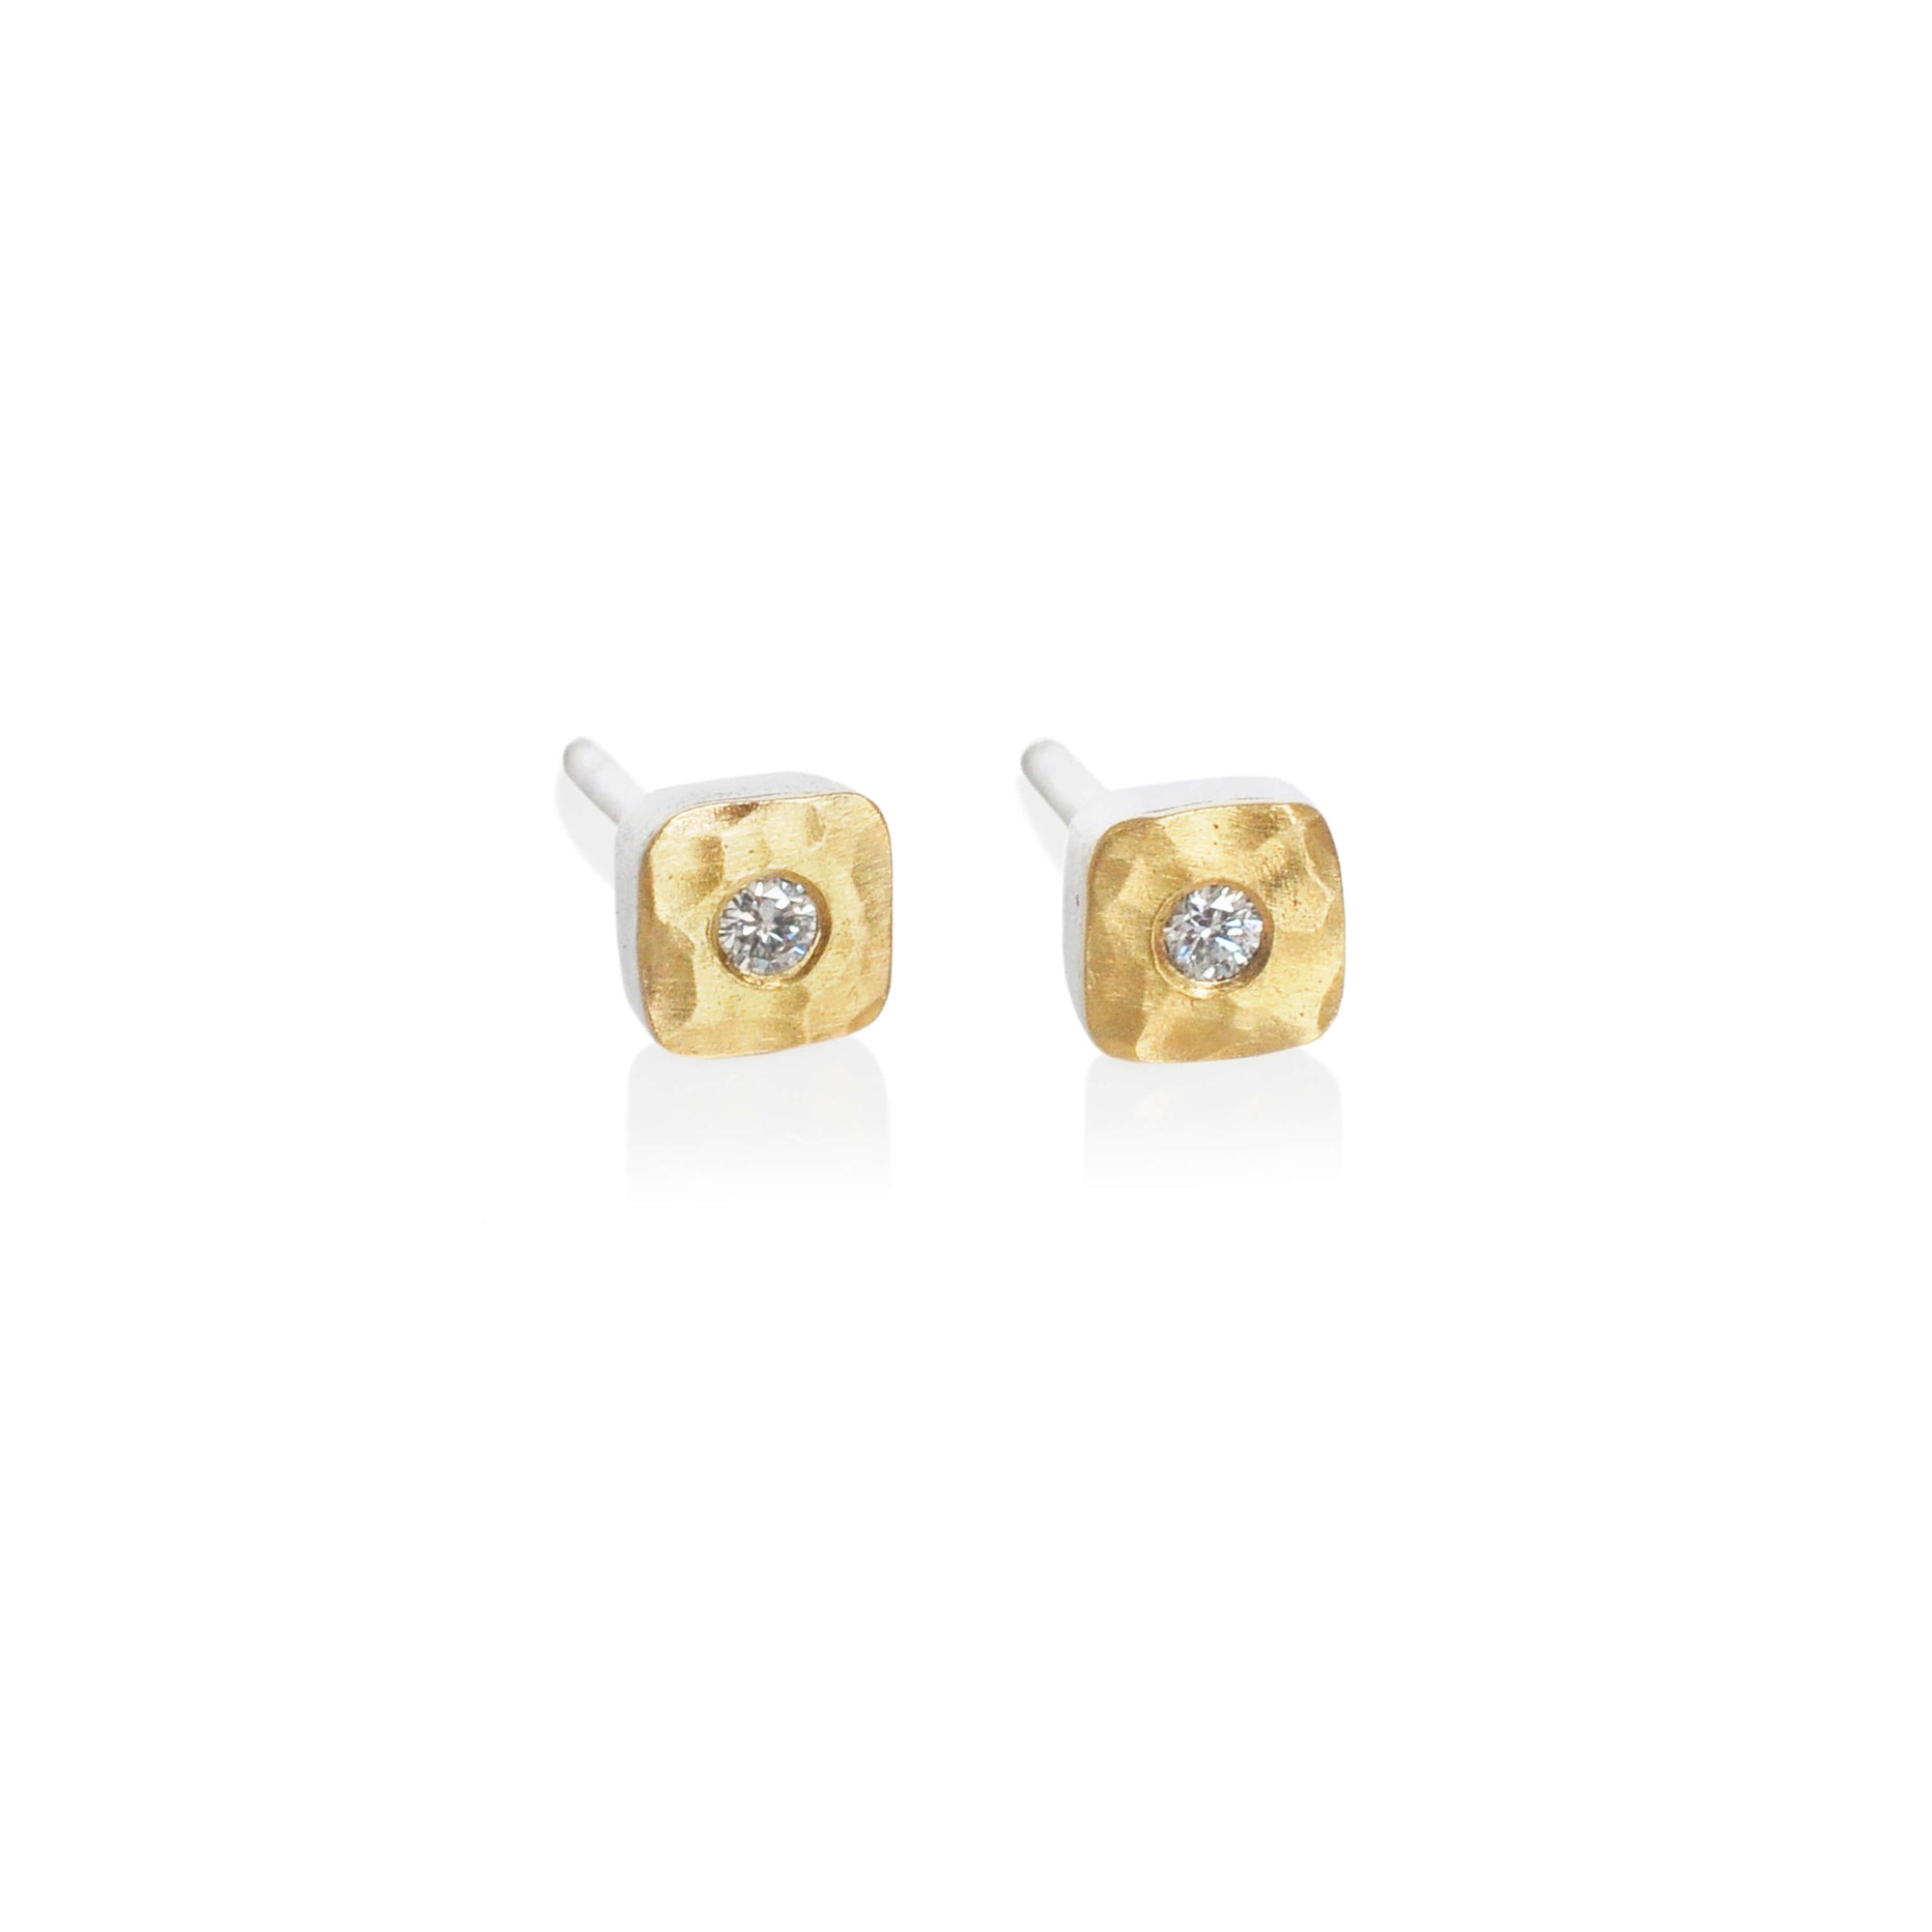 Silver and gold stud earrings with white diamonds. Handmade by EC Design Jewelry in Minneapolis, MN.